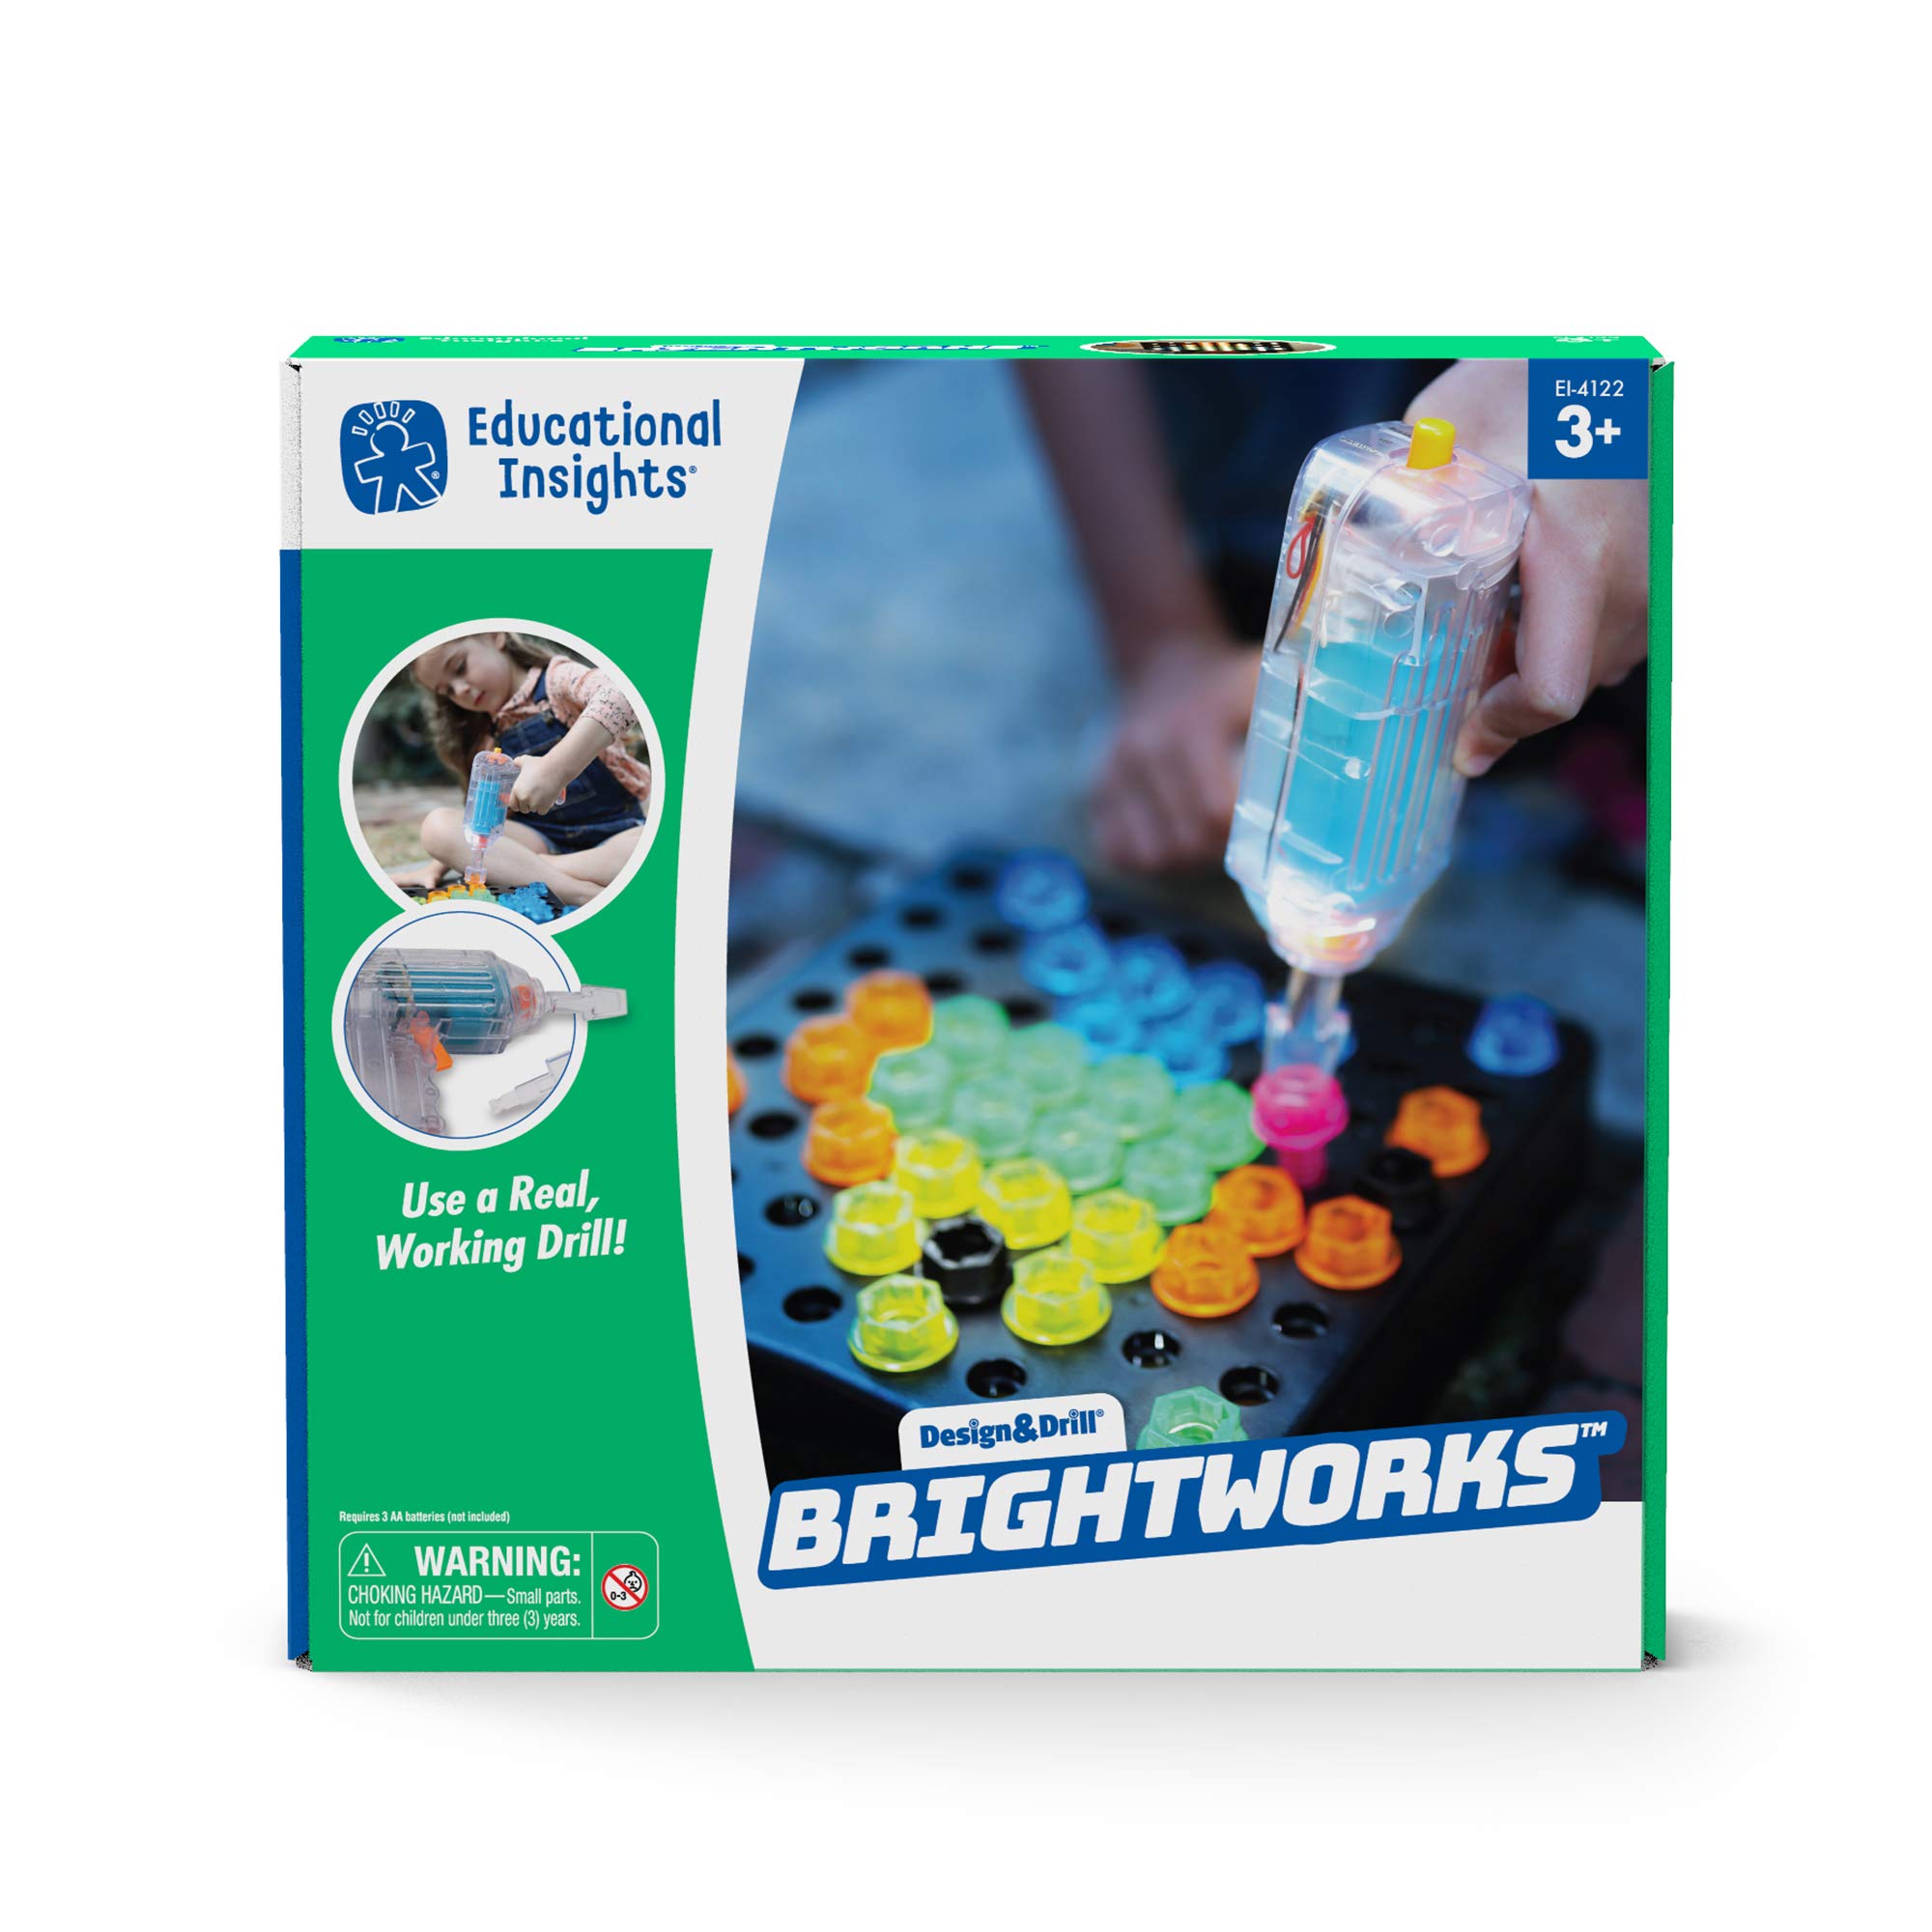 Educational Insights Design & Drill BrightWorks – 84-Piece Light Up Drill Set, STEM Learning with Toy Drill: Ages 3+